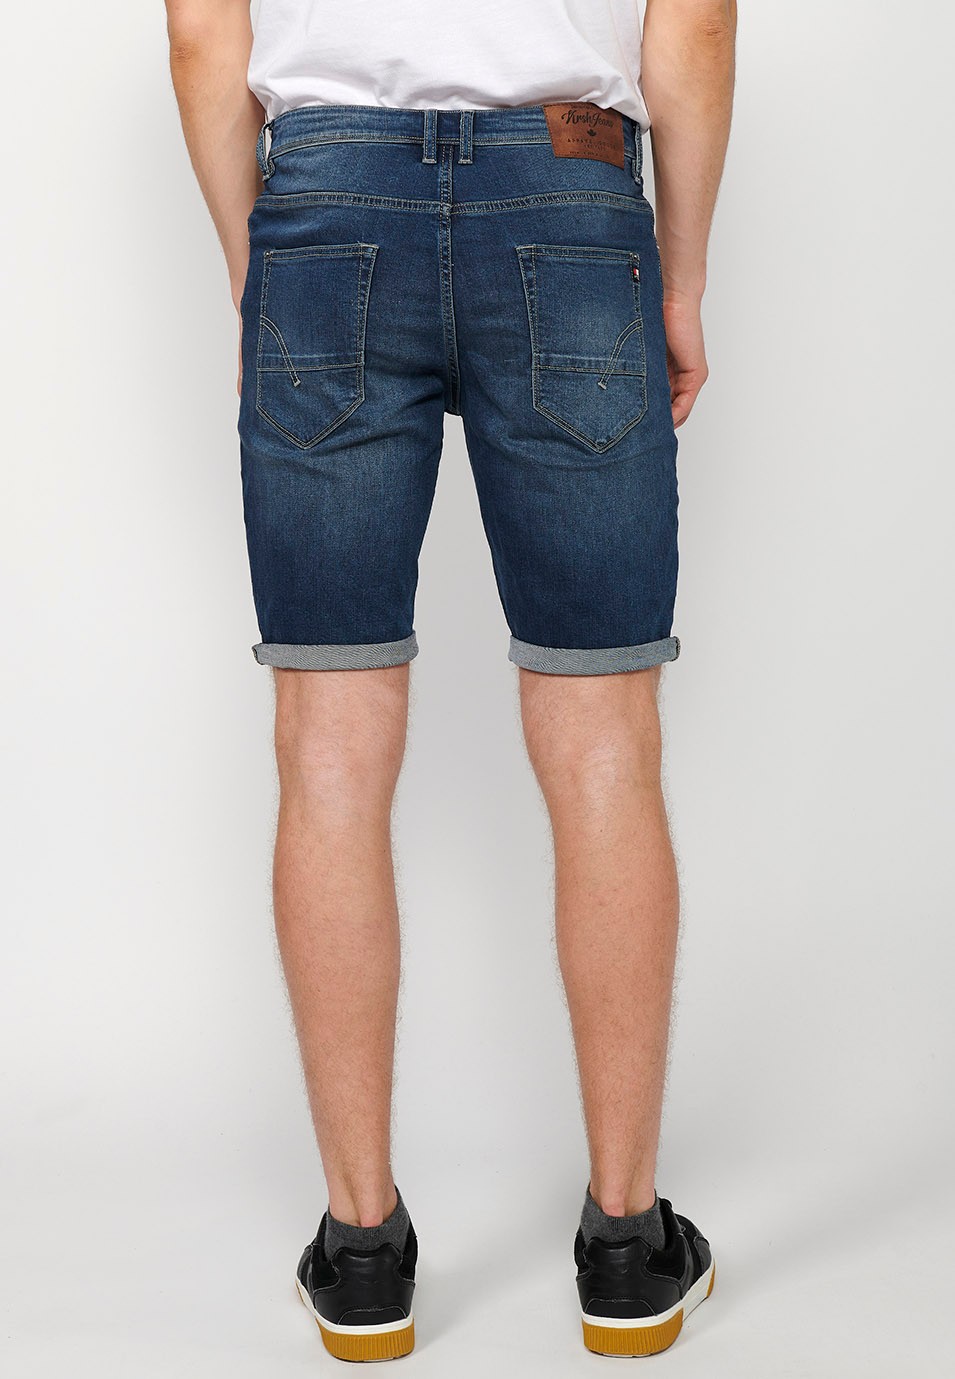 Blue Denim Bermuda Shorts with Turn-Up Finish and Front Zipper and Button Closure for Men 9